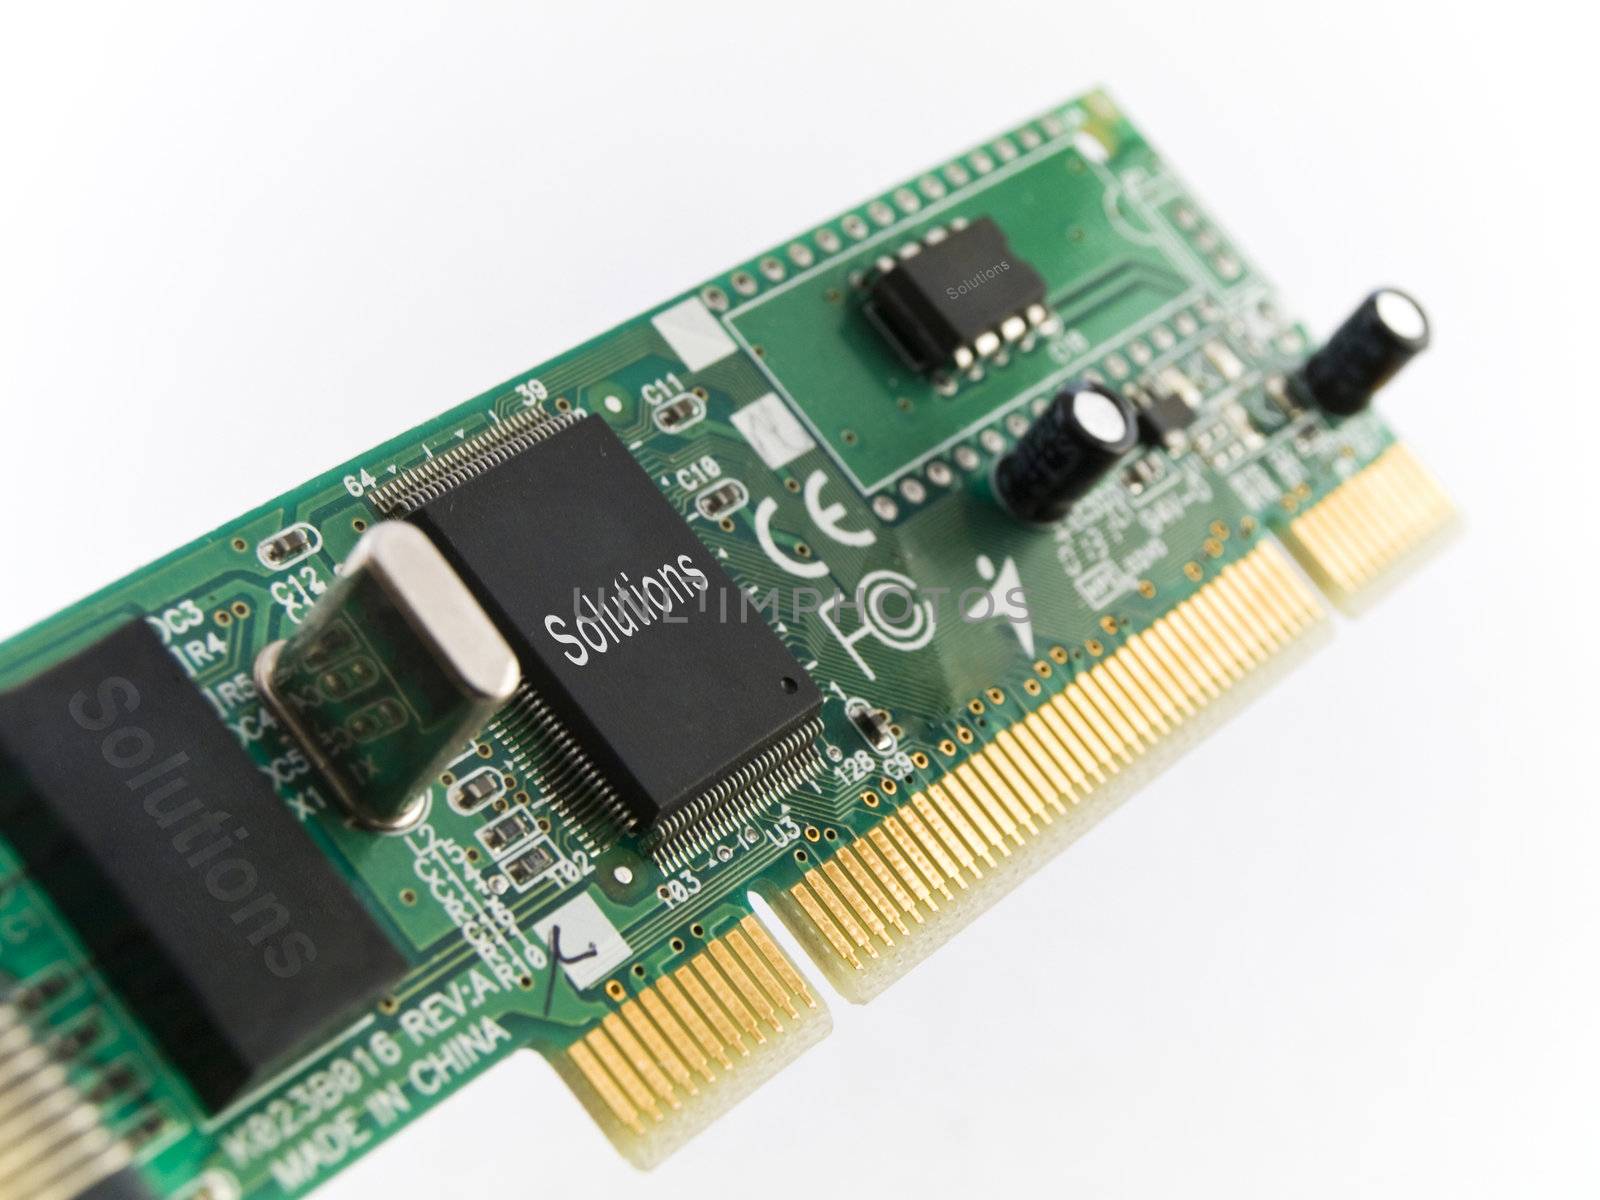 Solutions Circuit Board PCI on White Background